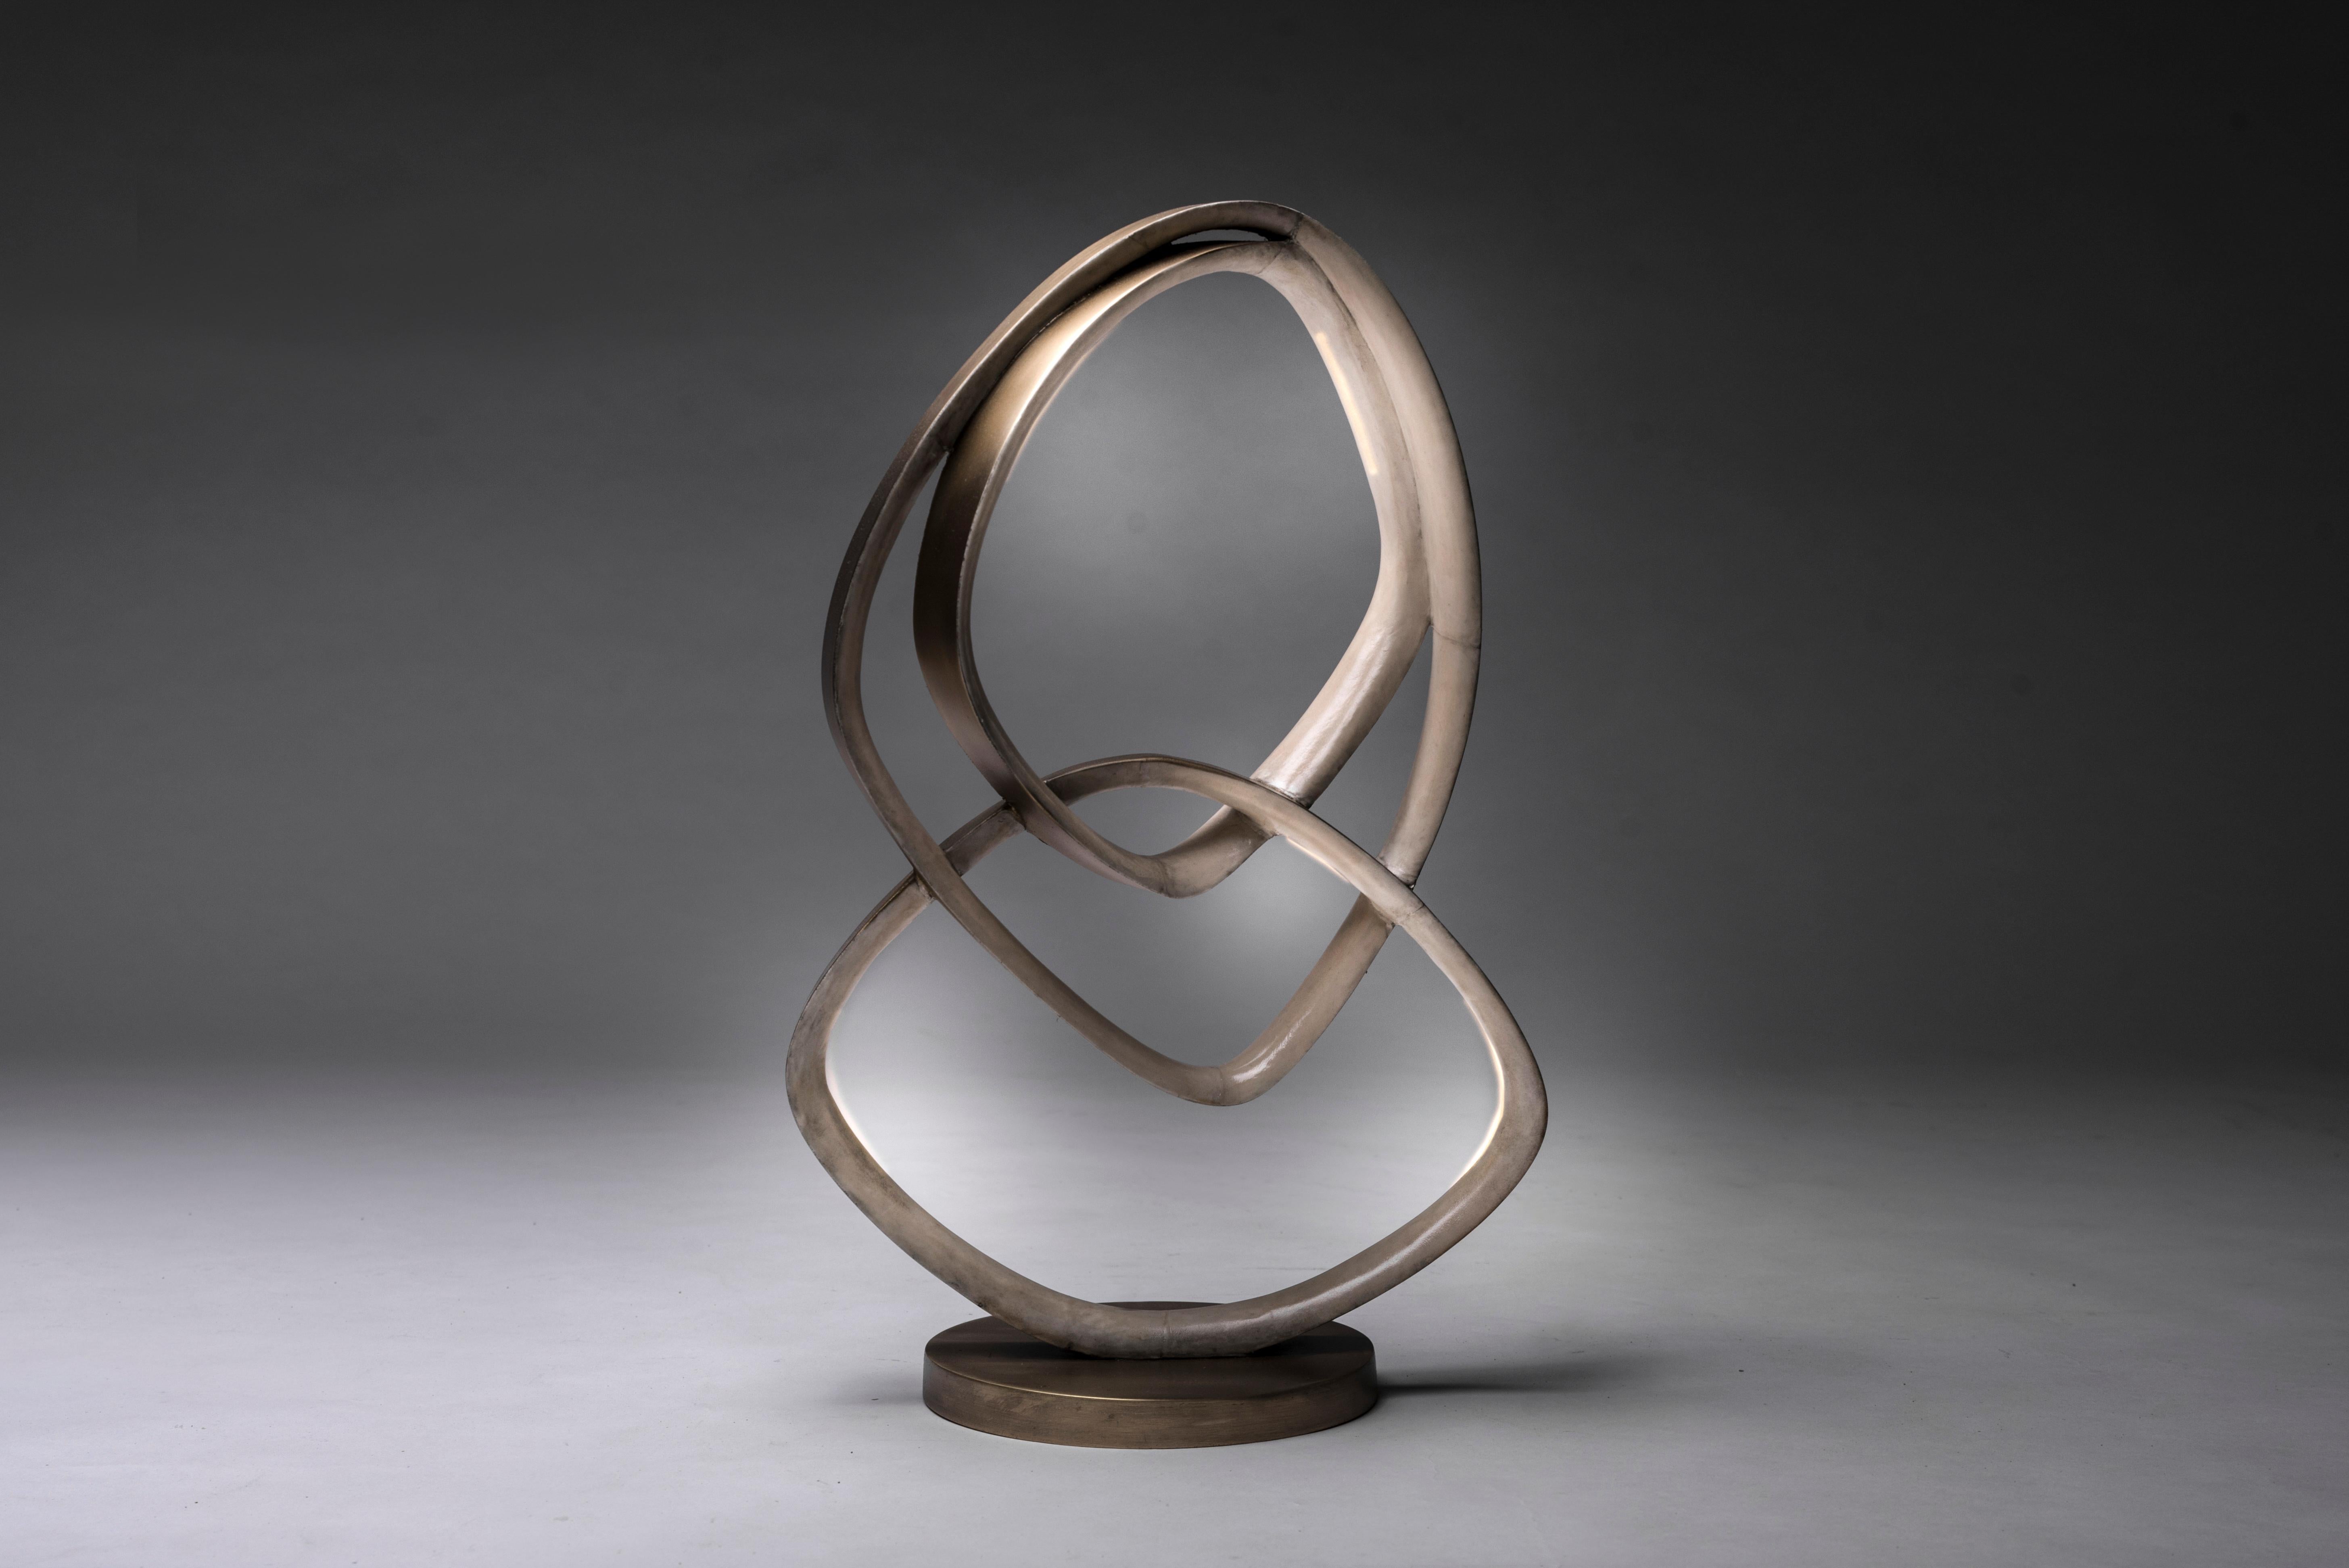 Patrick Coard Paris launches a unique and beautifully sculptural lighting collection inspired by music as a continuation of his candle line. The Teardrop table lamp in parchment and bronze-patina brass is an ethereal and sculptural piece. Each ring